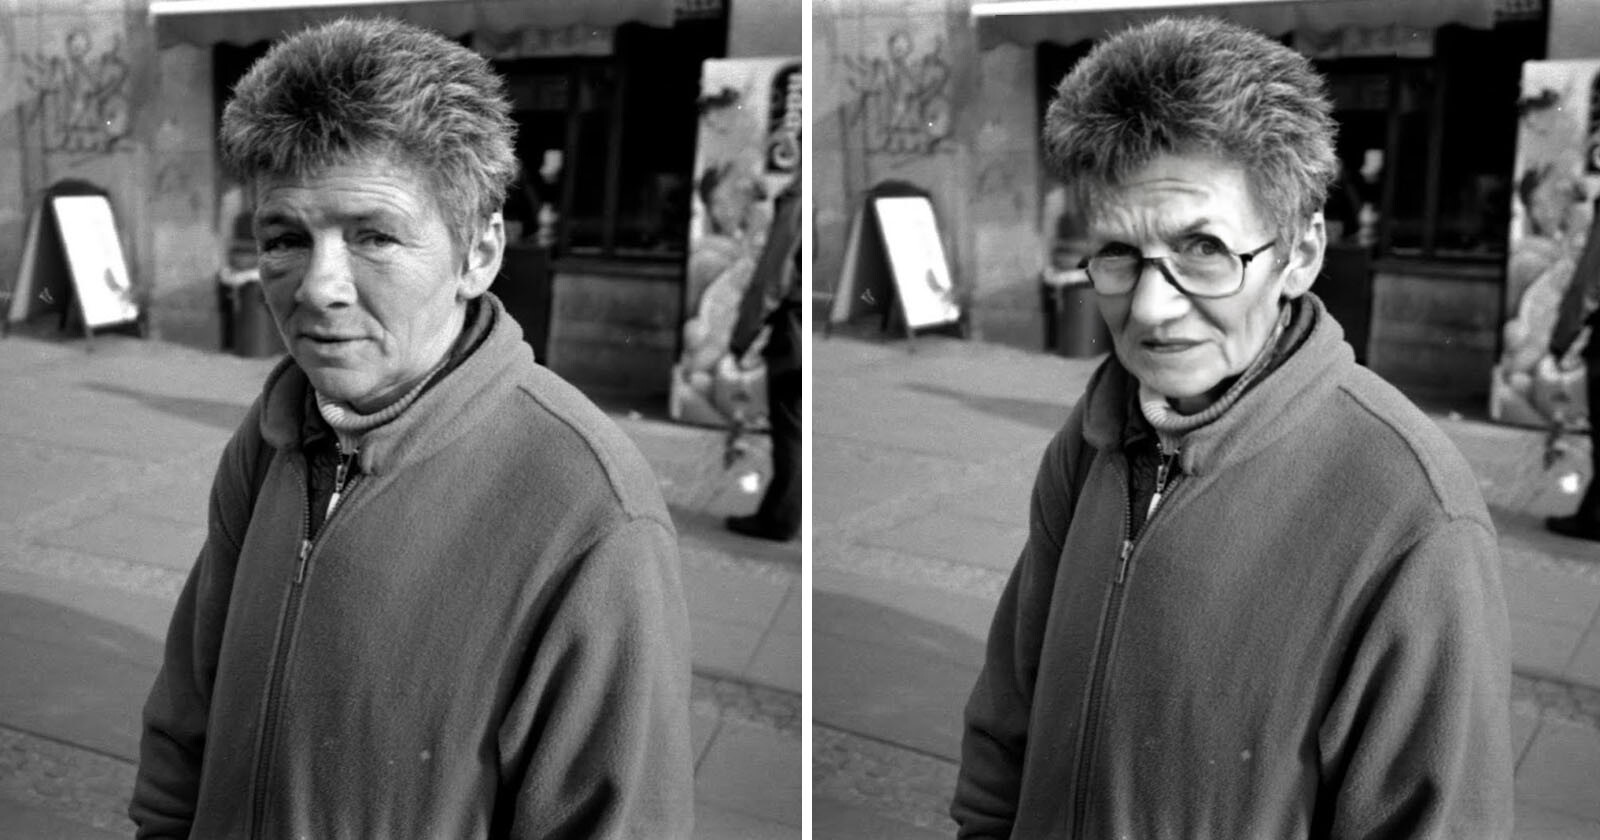  street photographer uses face swap hide his subjects 